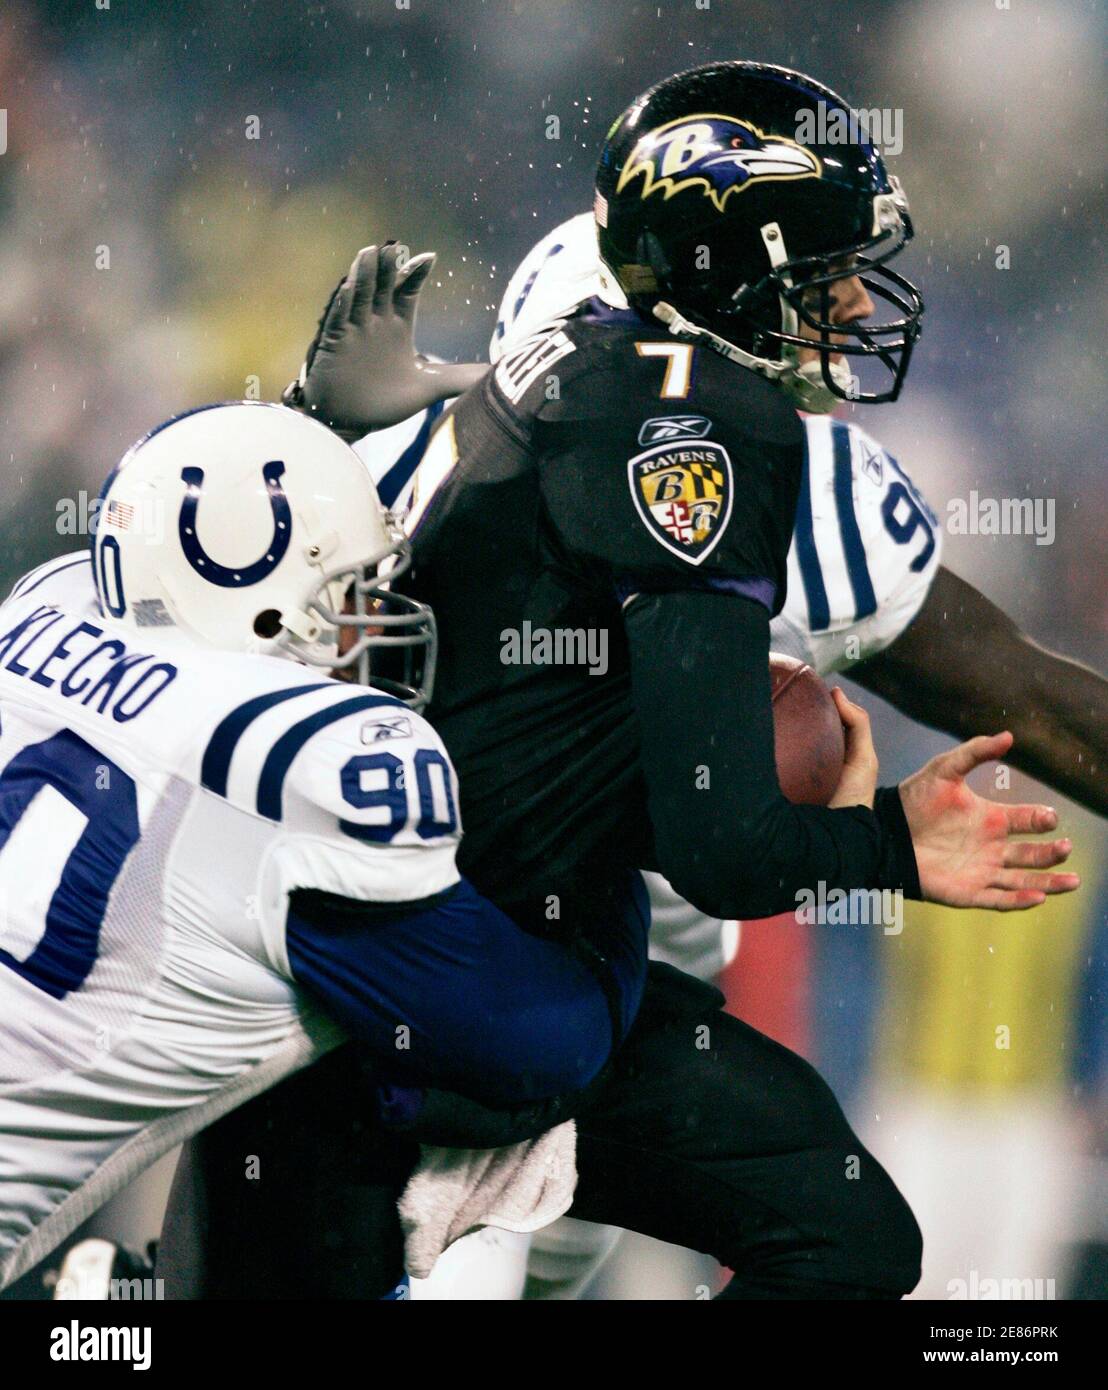 Indianapolis Colts defensive tackle Dan Klecko (90) and teammate Robert Mathis combine to sack Baltimore Ravens quarterback Kyle Boller (7) during the second quarter of their NFL football game in Baltimore, Maryland, December 9, 2007.     REUTERS/Gary Cameron     (UNITED STATES) Stock Photo